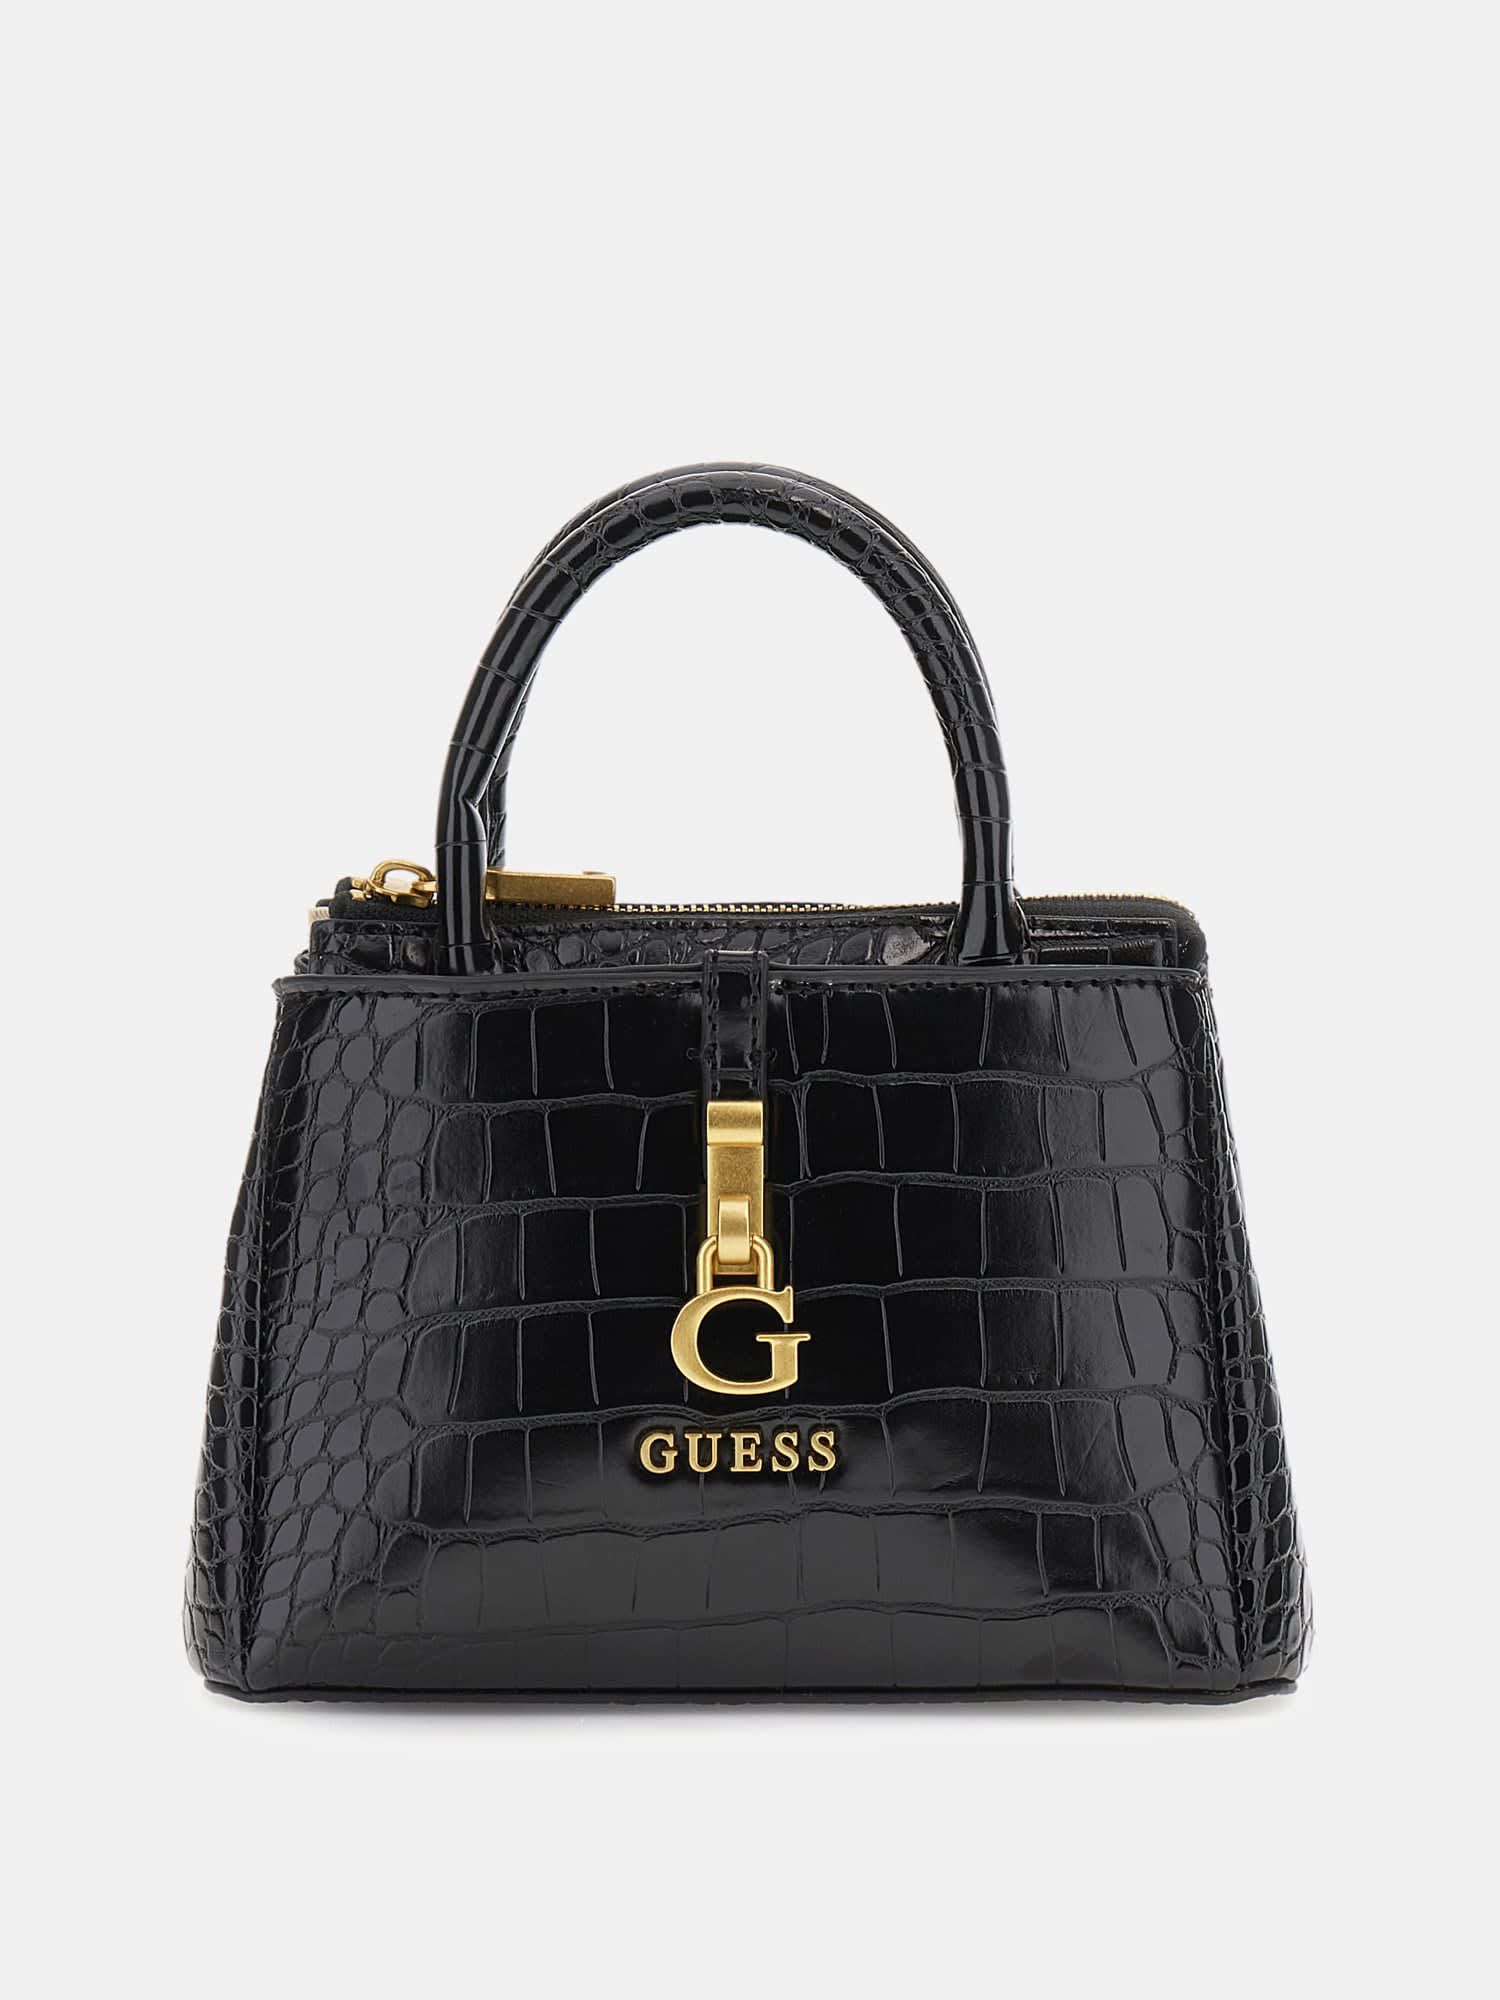 Buy Guess Handbags-53123-659 Available @ - Reflexions